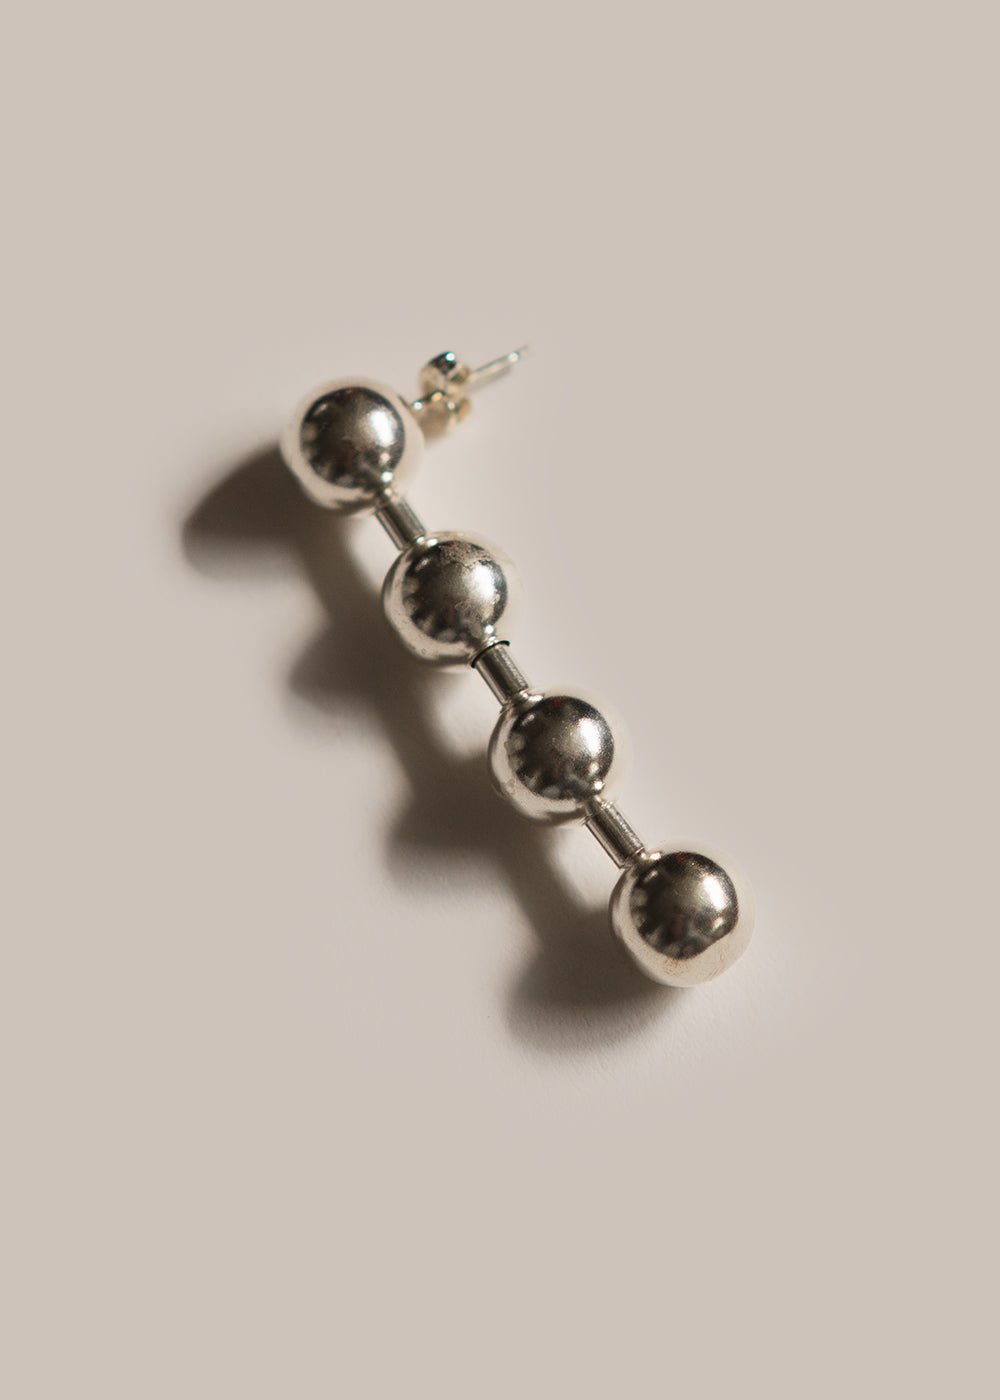 Martine Ali XL Ball Earring - New Classics Studios Sustainable Ethical Fashion Canada